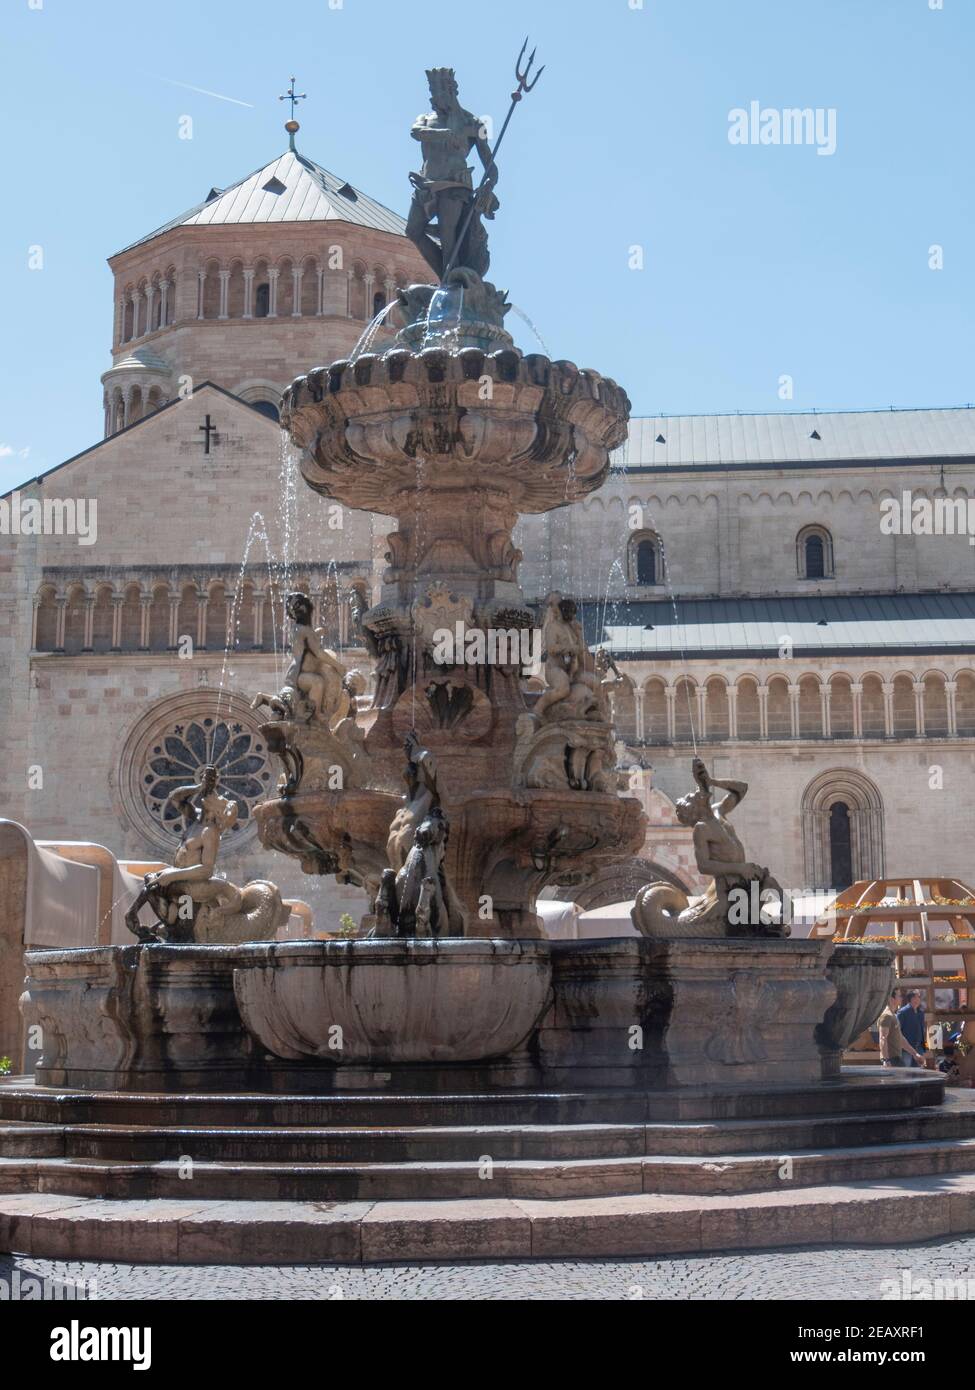 TRENTO, ITALY - JUNE, 1, 2019: fountain of neptune and trento cathedral in the main square Stock Photo